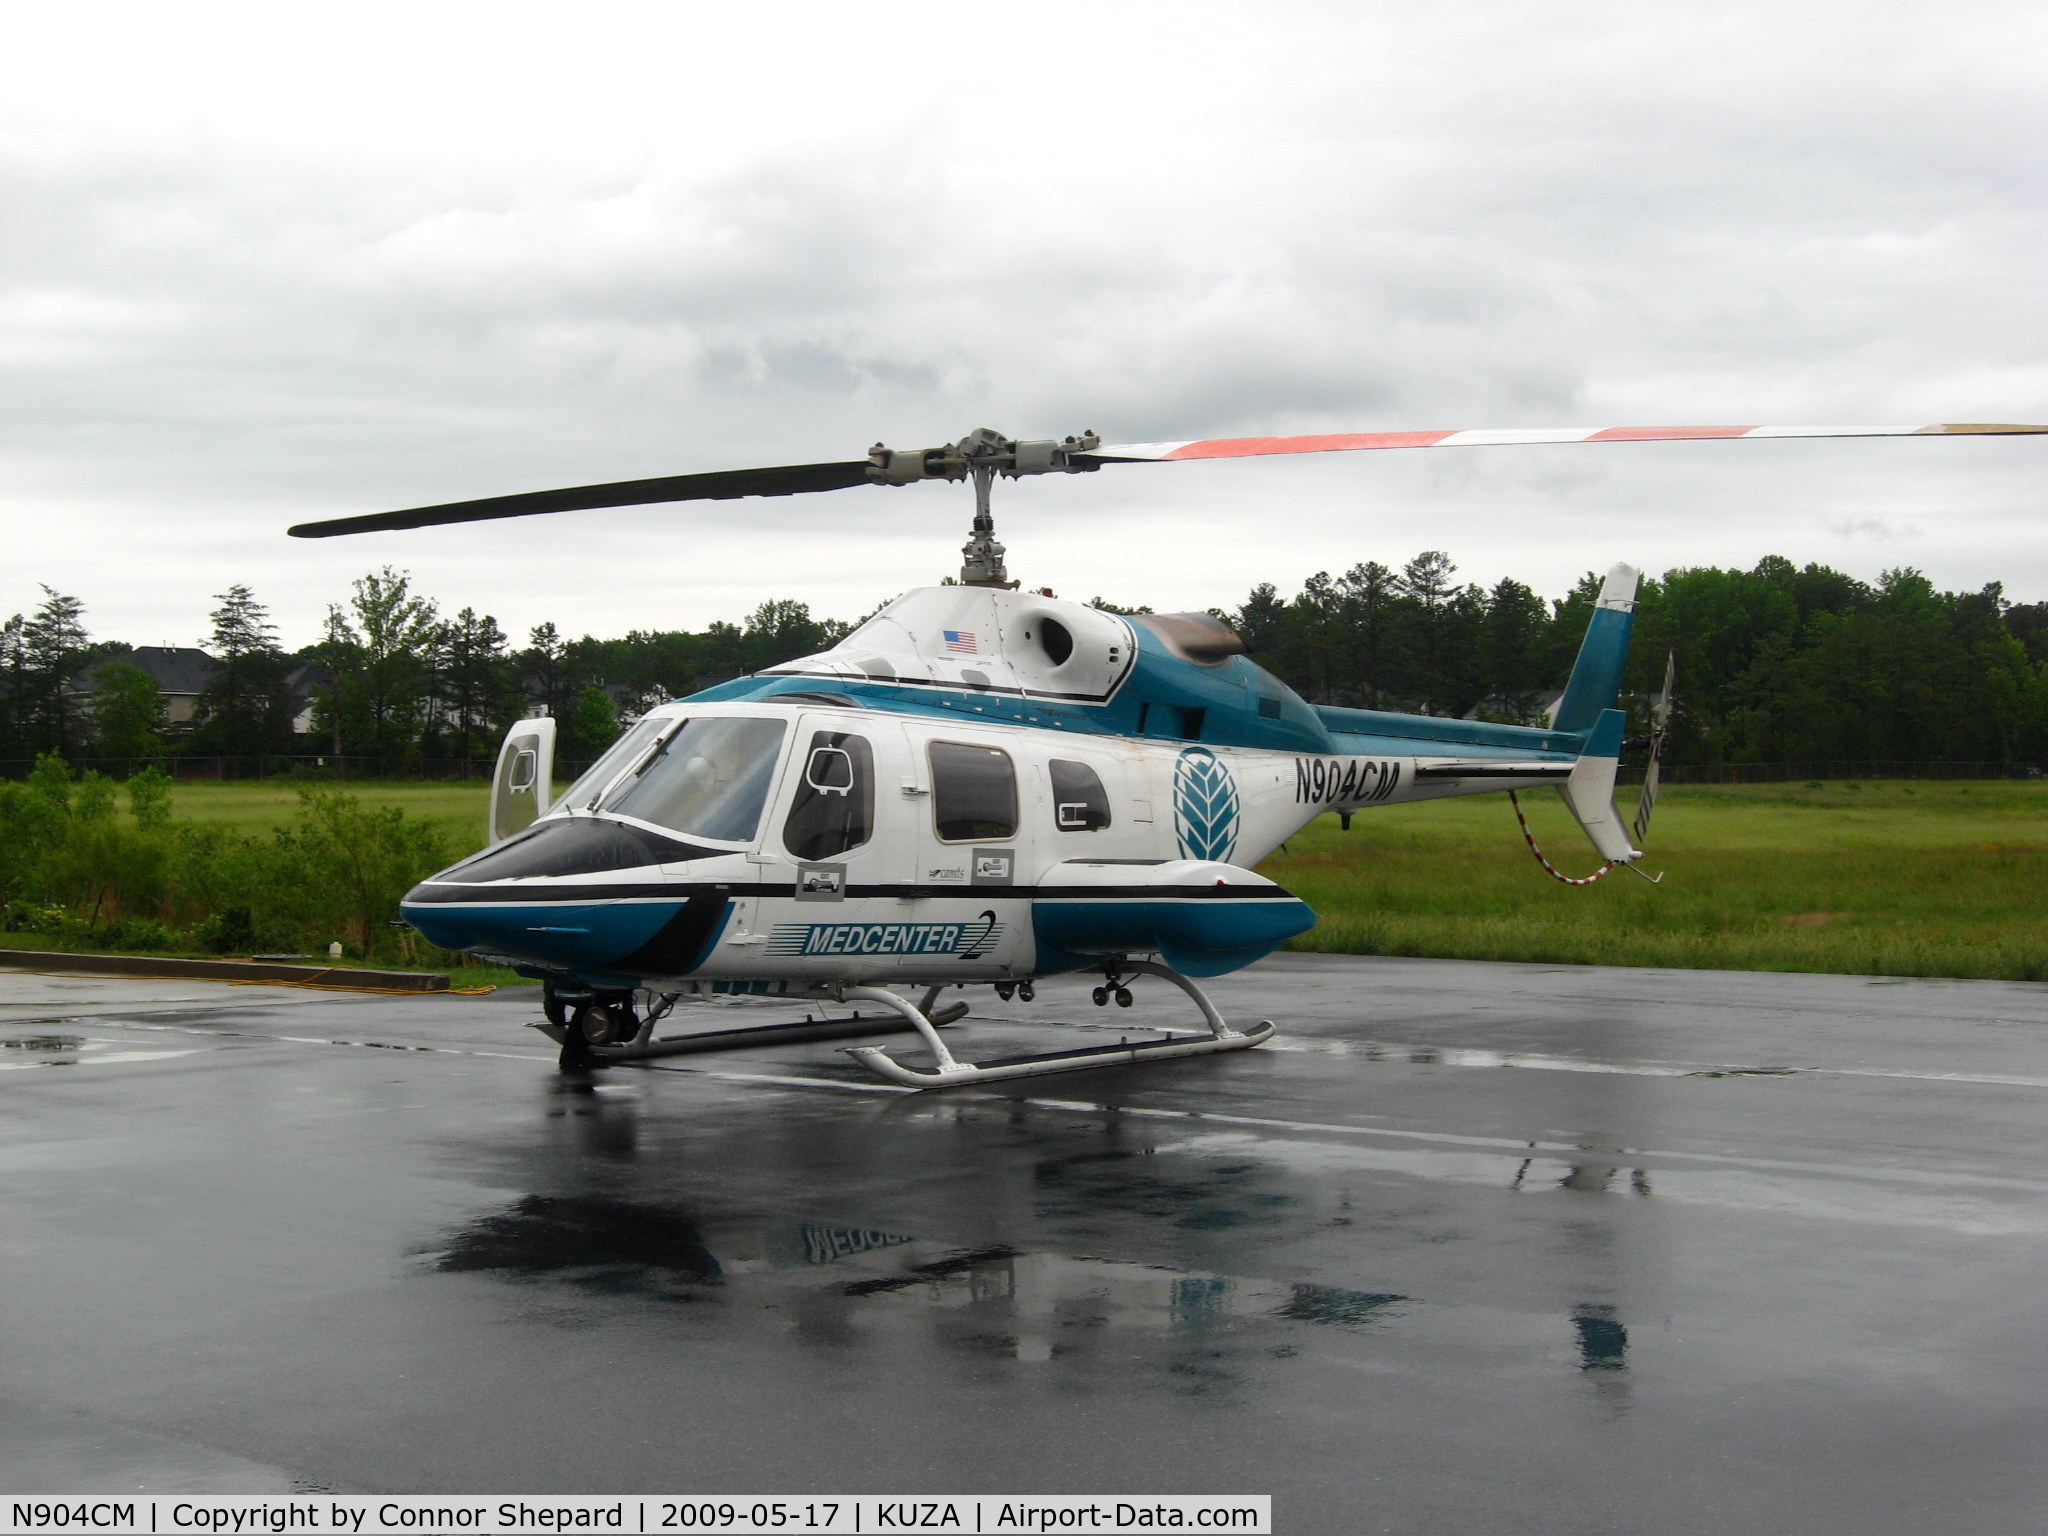 N904CM, 1993 Bell 230 C/N 23013, CMC helicopter at open house event